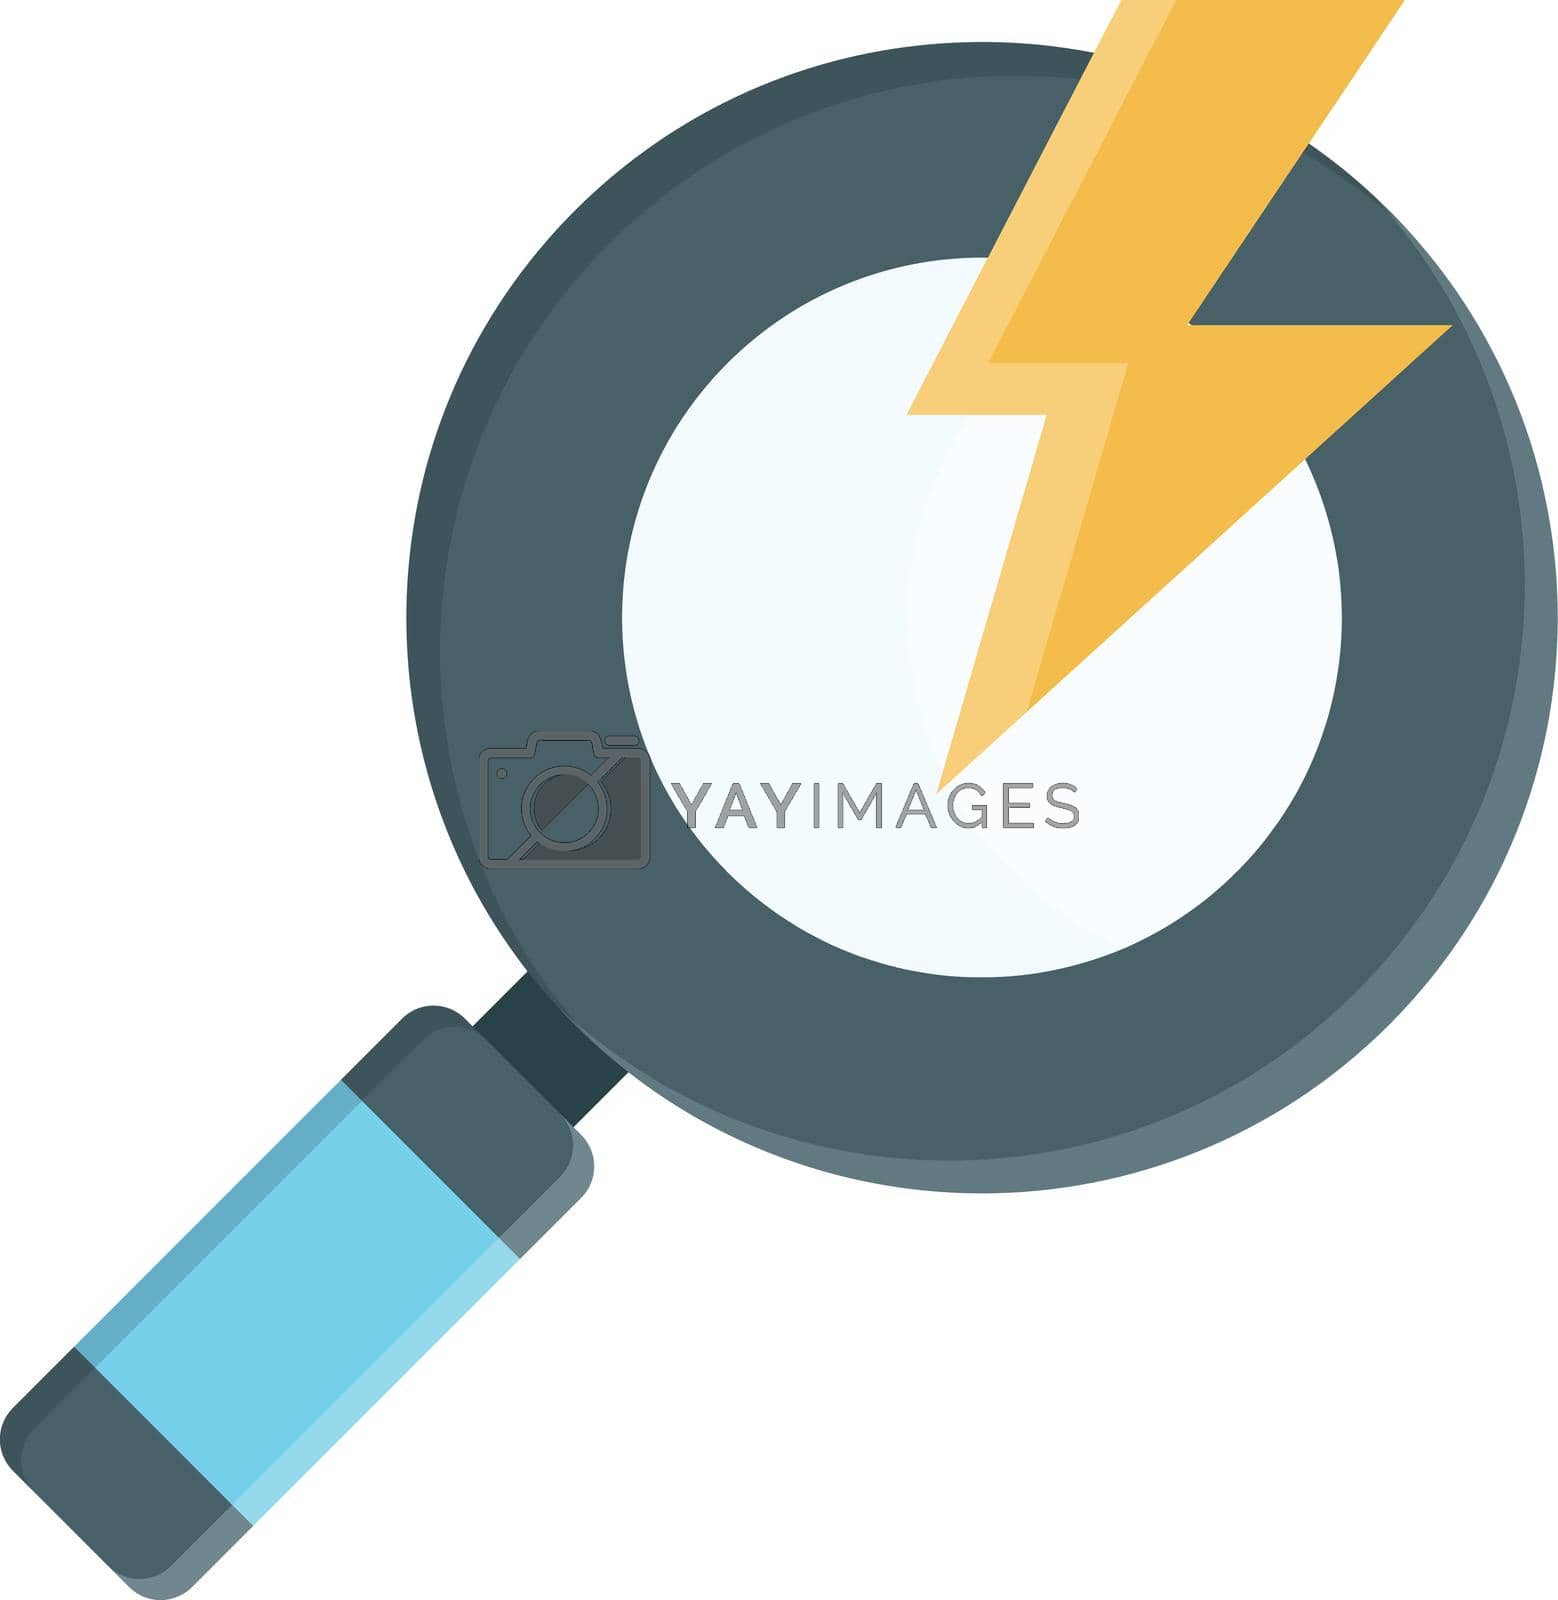 Royalty free image of search by FlaticonsDesign